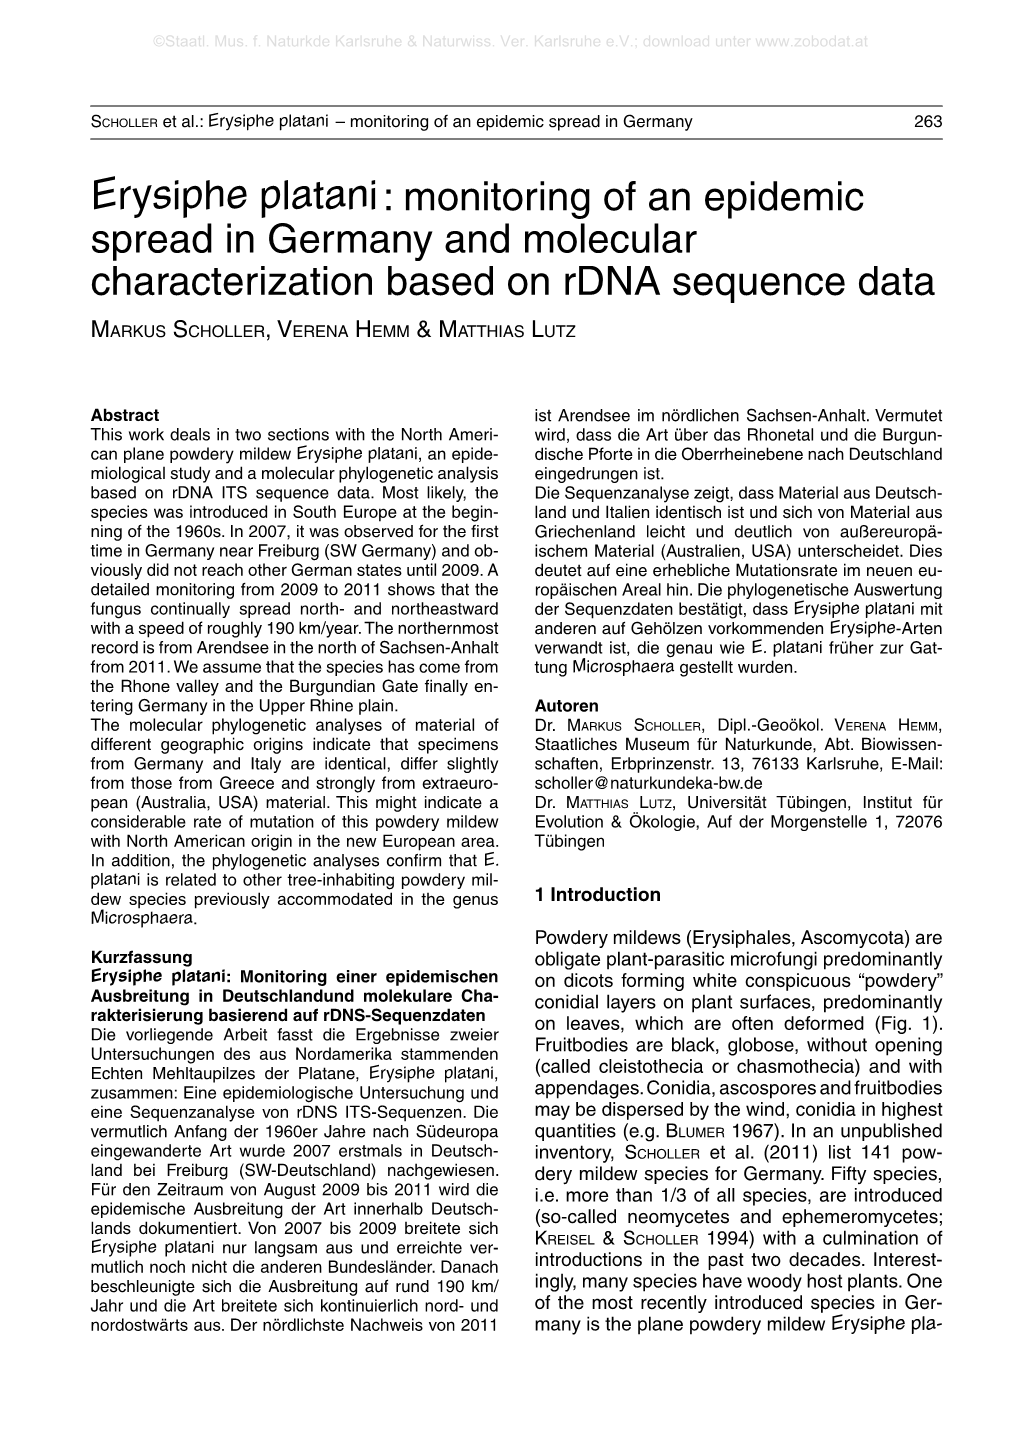 Erysiphe Platani : Monitoring of an Epidemic Spread in Germany and Molecular Characterization Based on Rdna Sequence Data